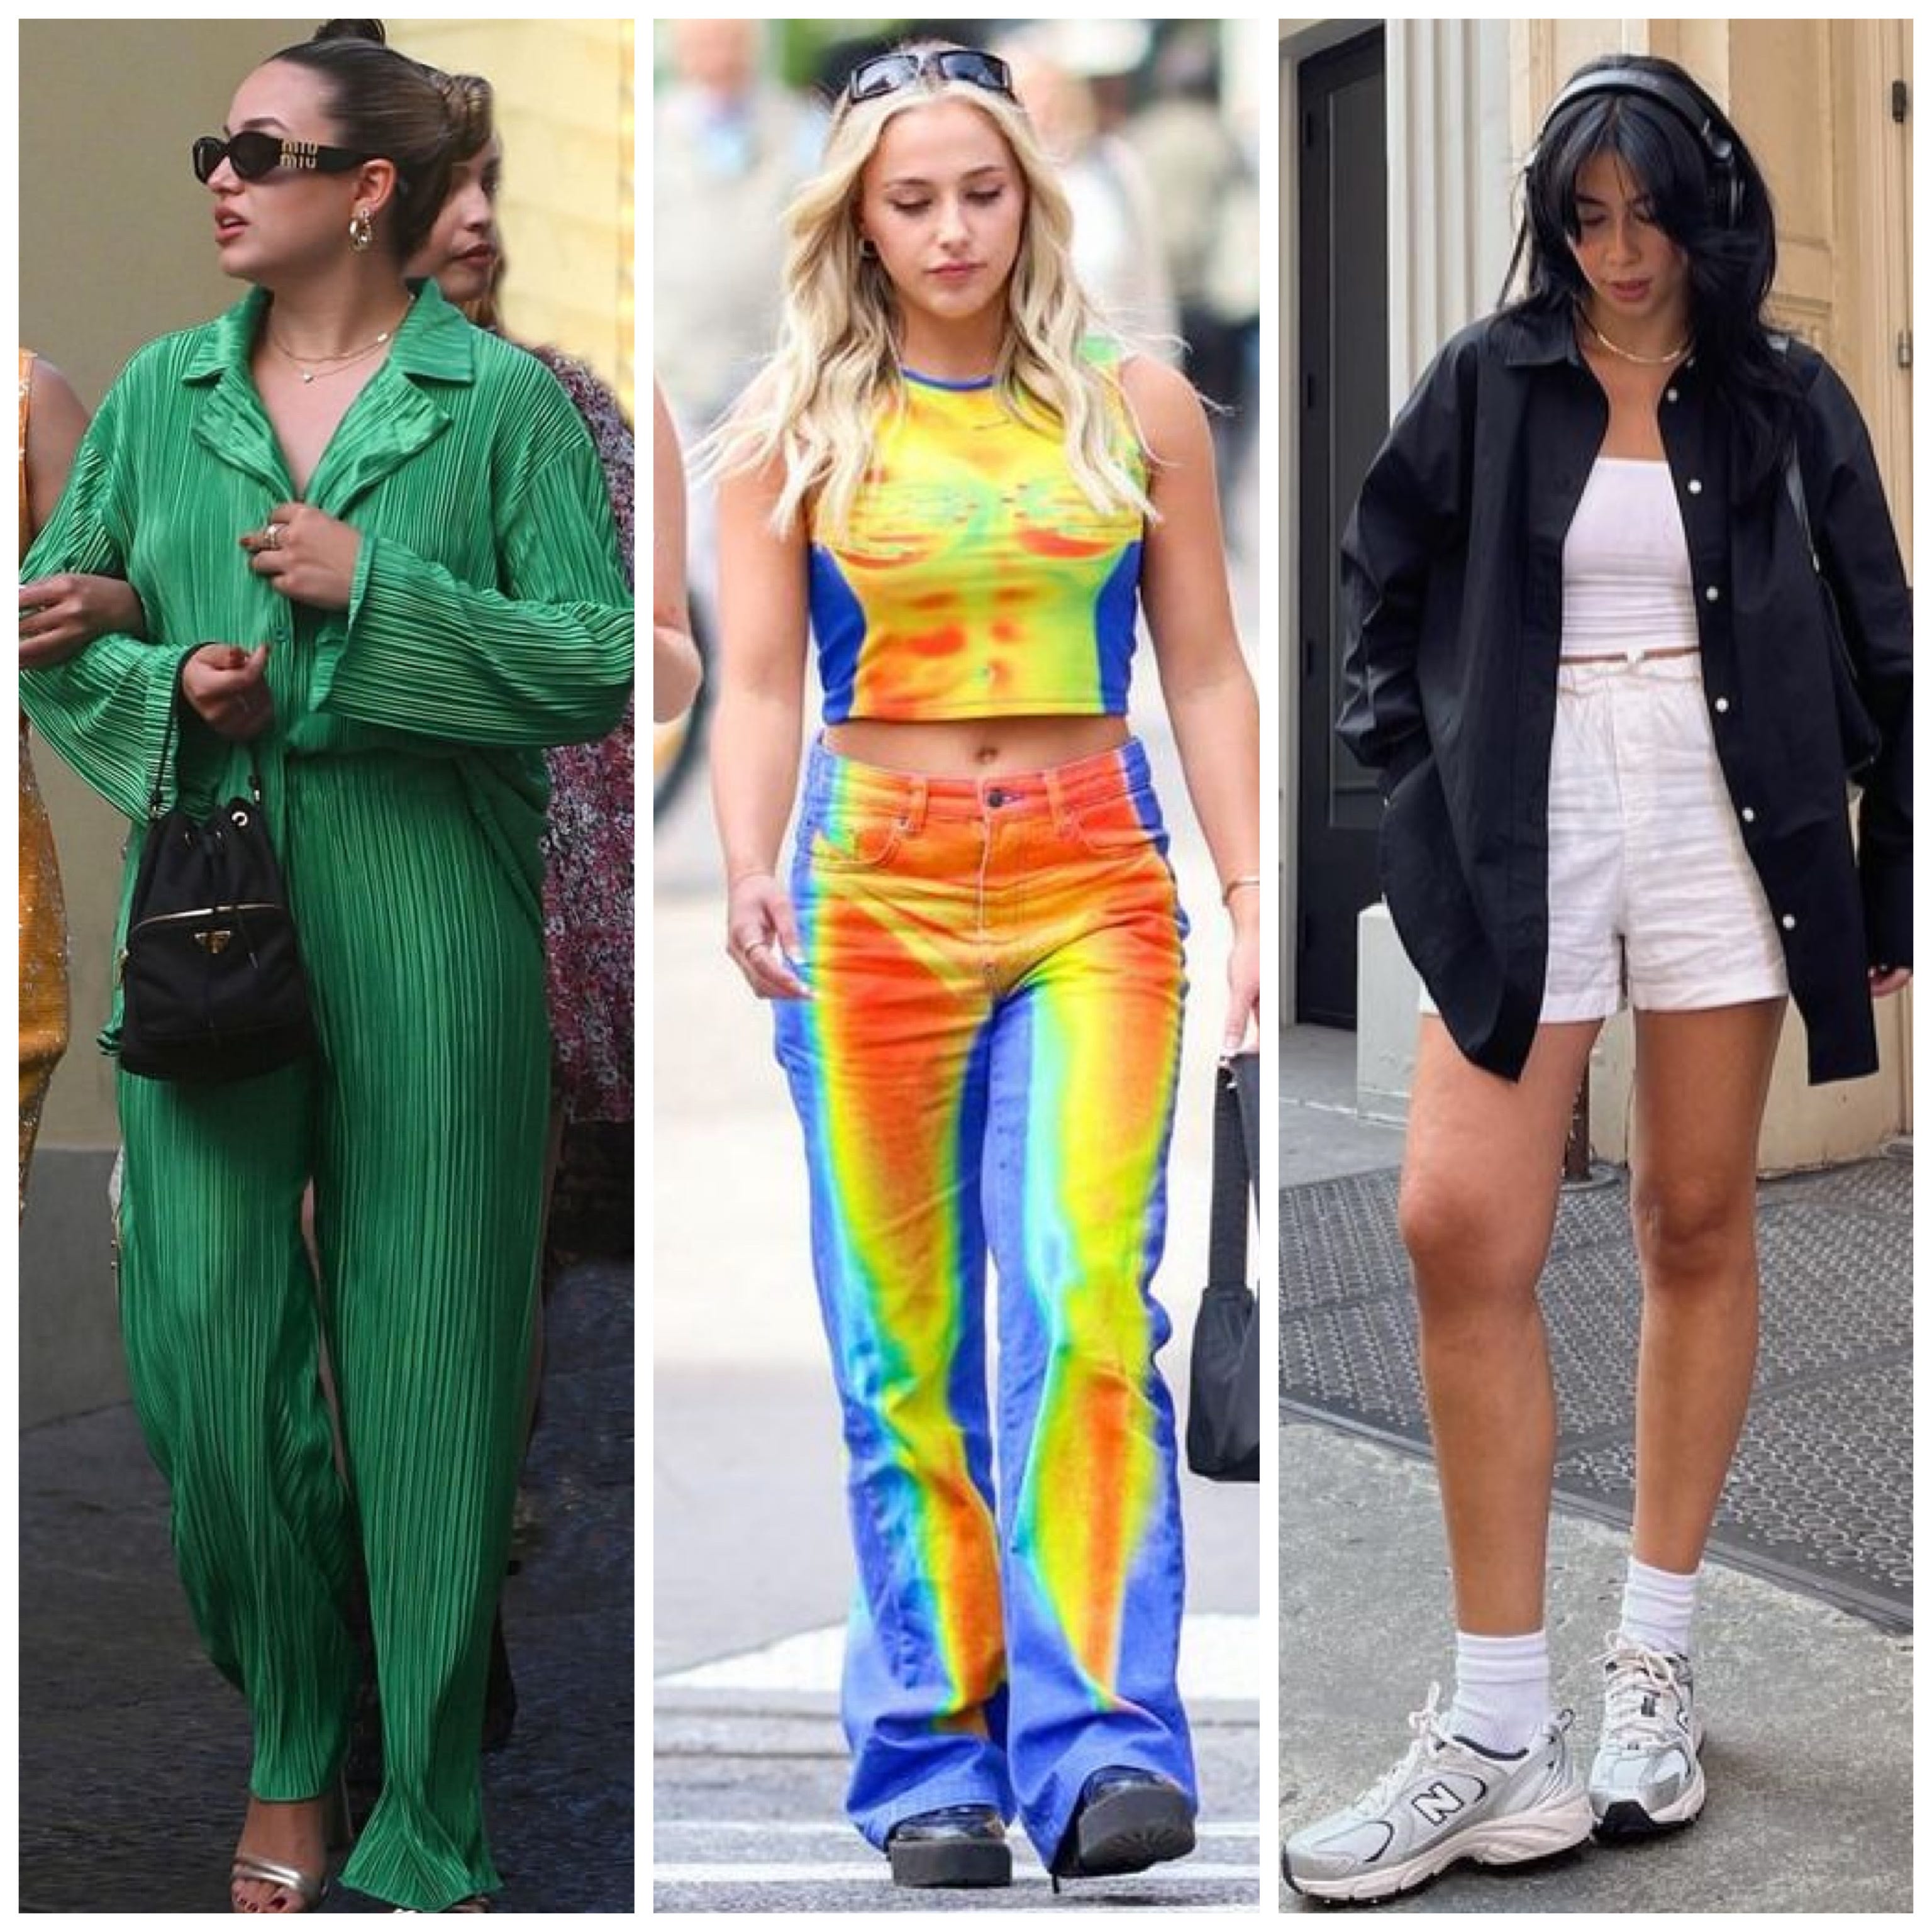 August 2022: Best In Fashion - by J'Nae Phillips